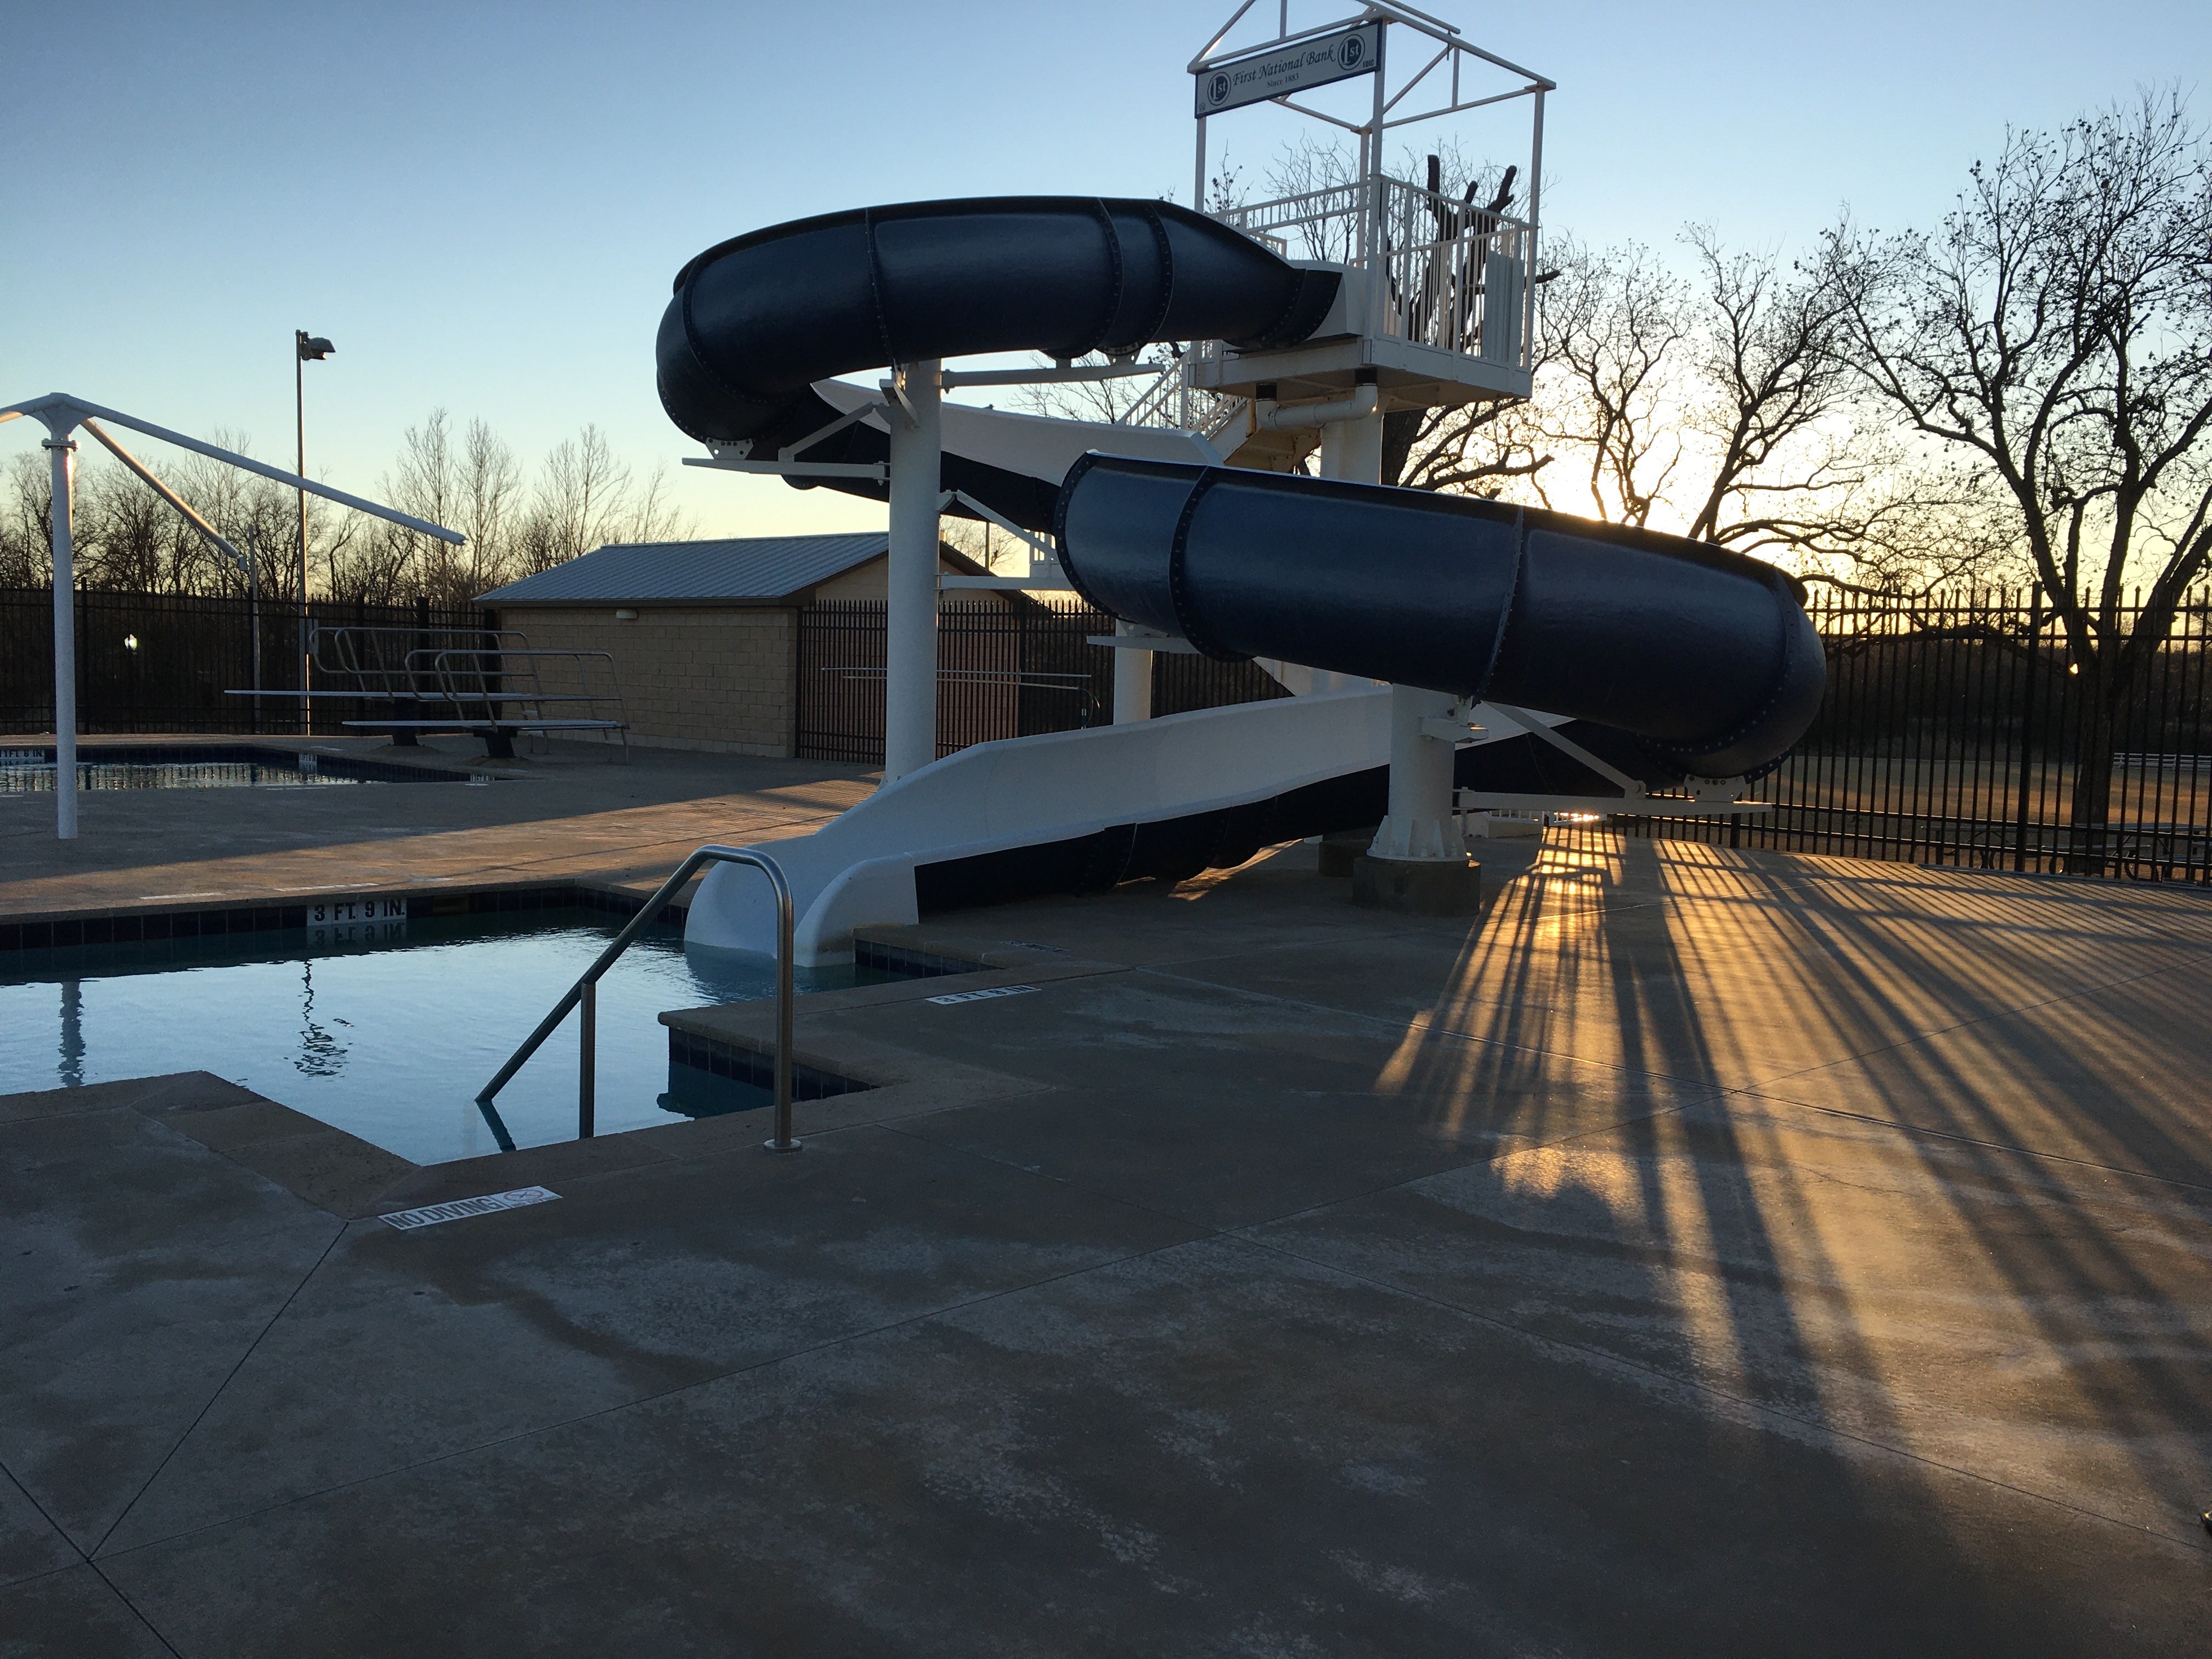 Only a block away is our town’s awesome Webb Park, which includes this popular city pool!